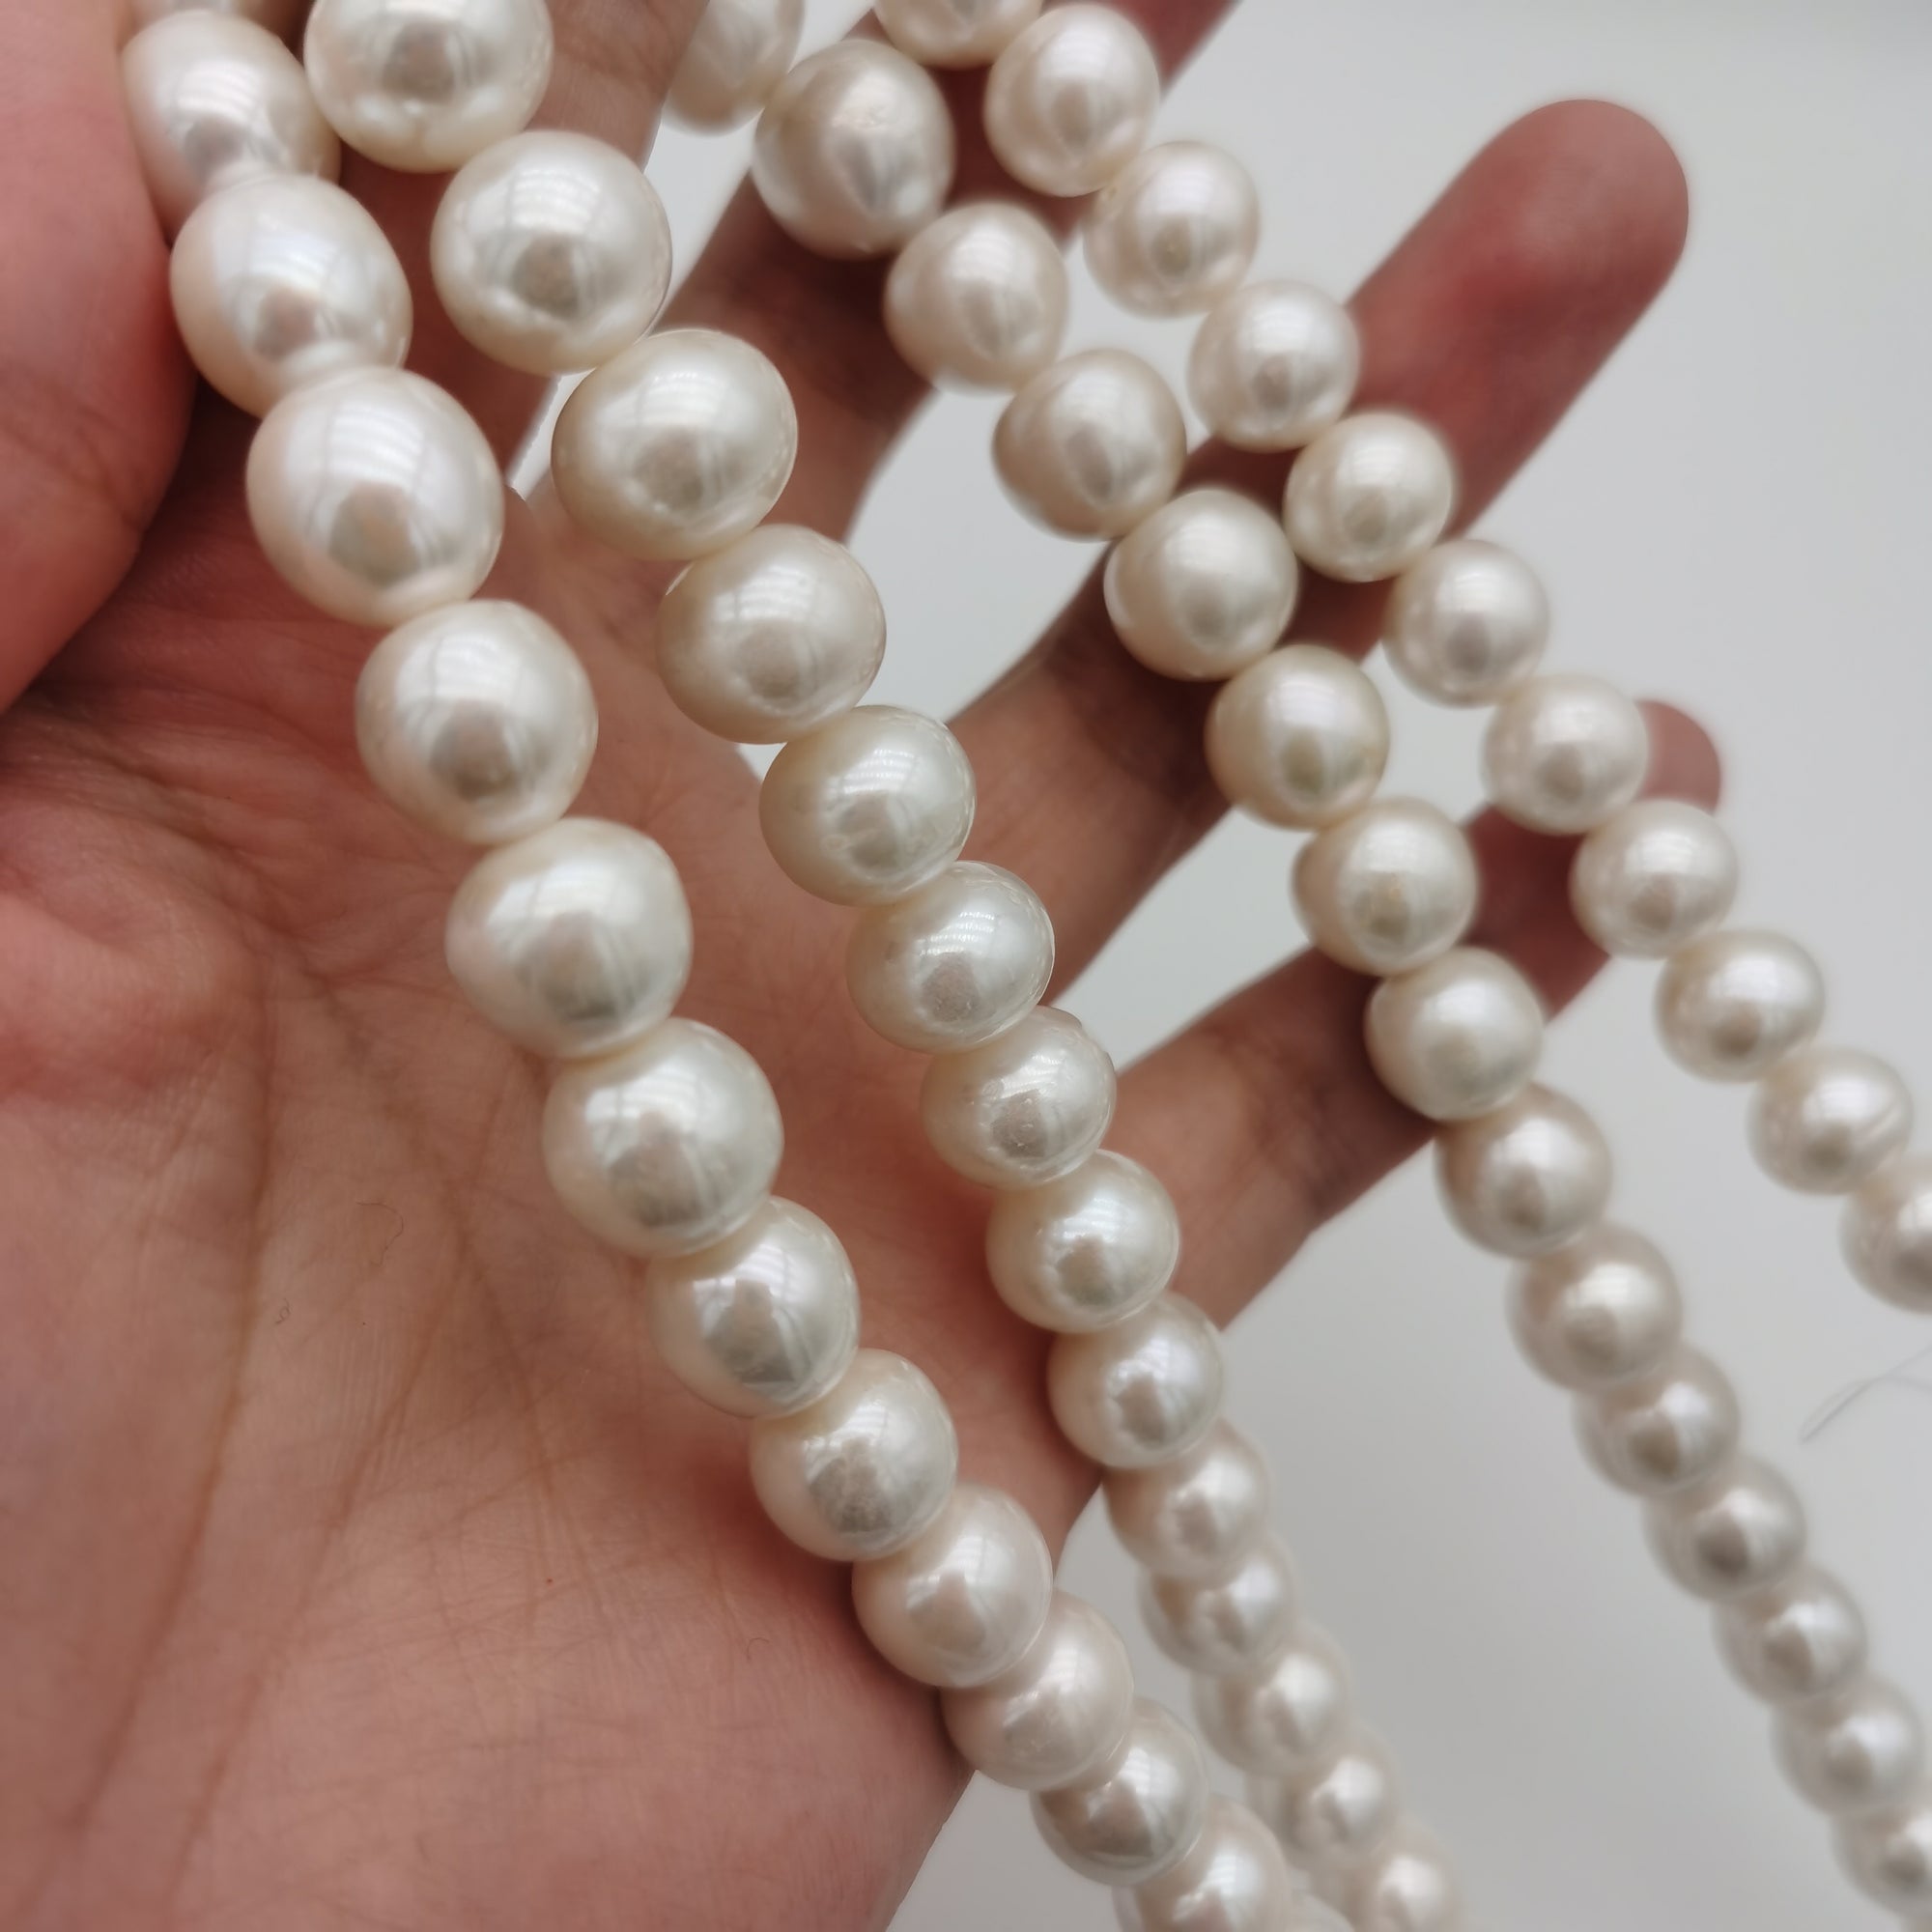 4A+ 10-12mm High Luster Nearly Round Freshwater Pearls